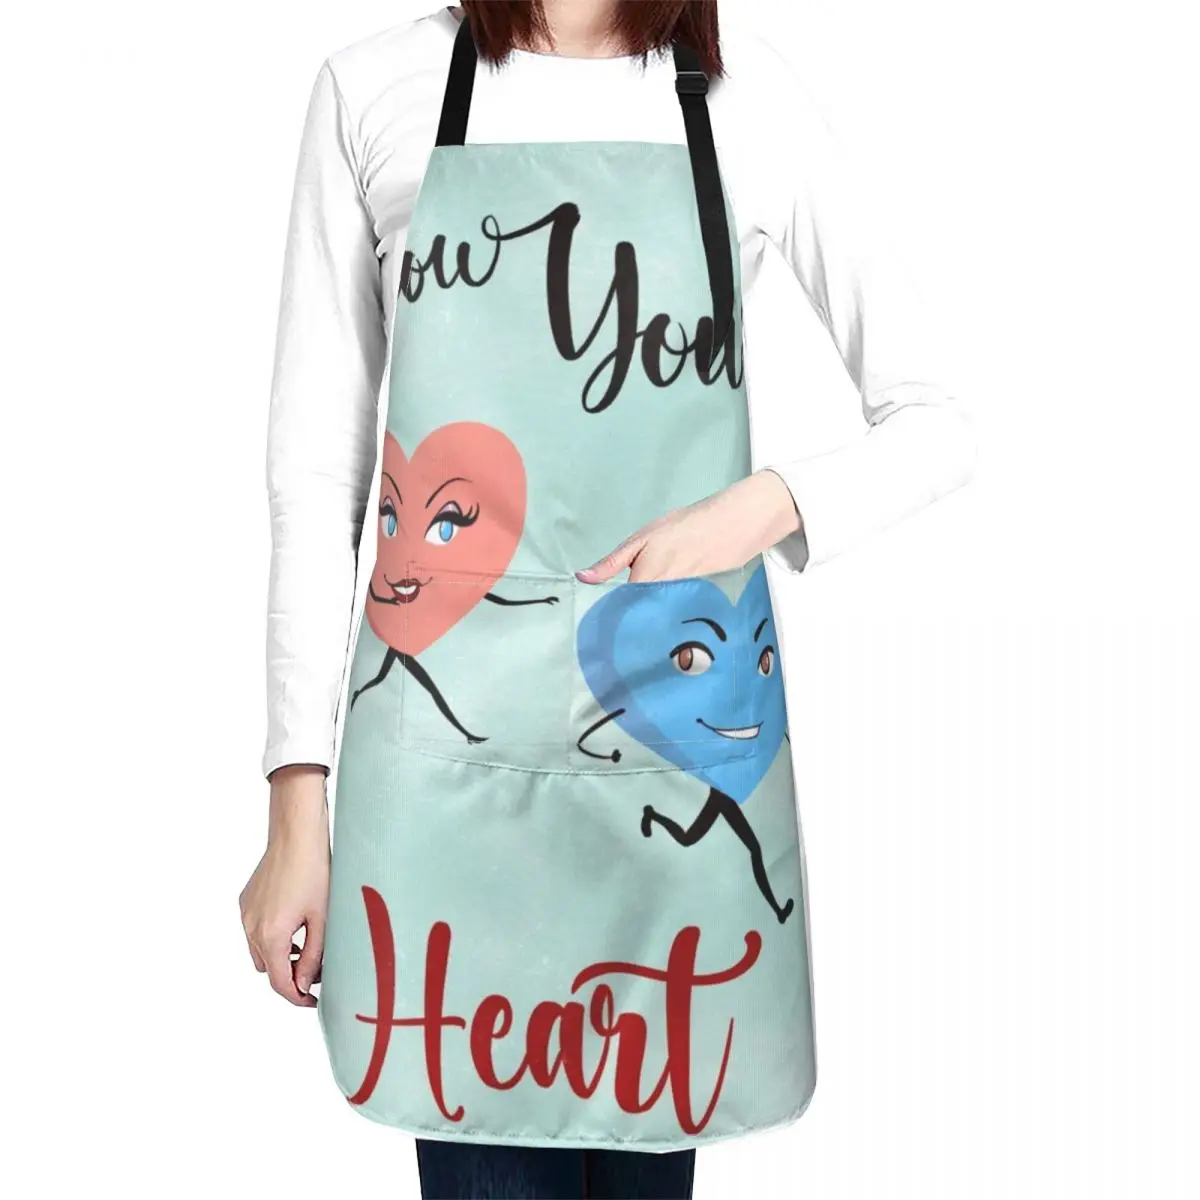 

Follow Your Heart (Girl chasing Boy) Apron Kitchen Items For Home Apron For Women professional hairdresser apron chefs apron